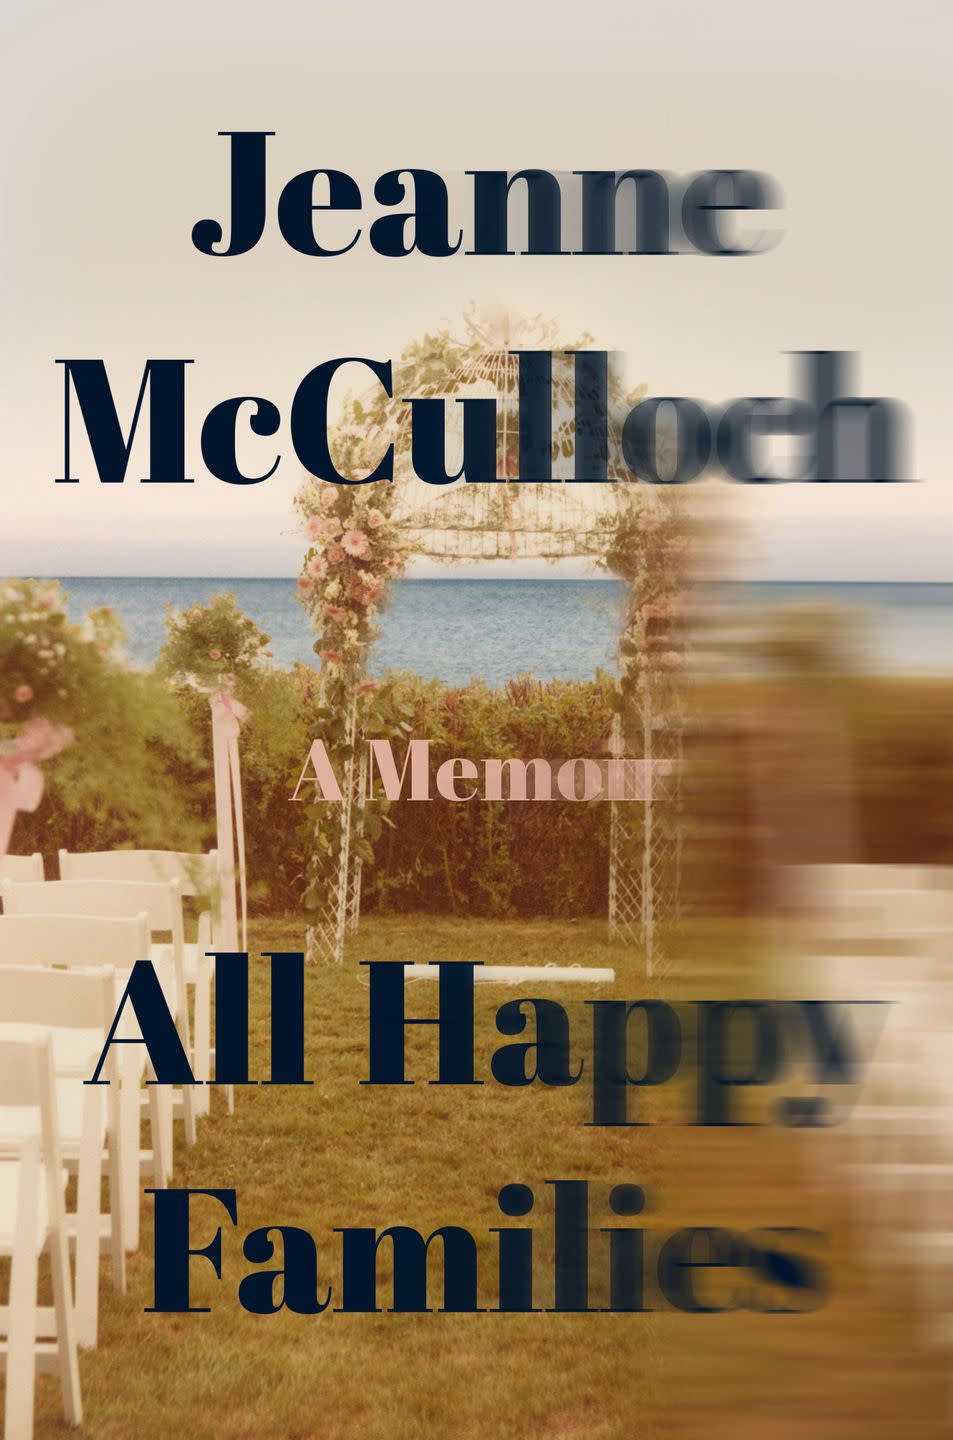 All Happy Families by Jeanne McCulloch